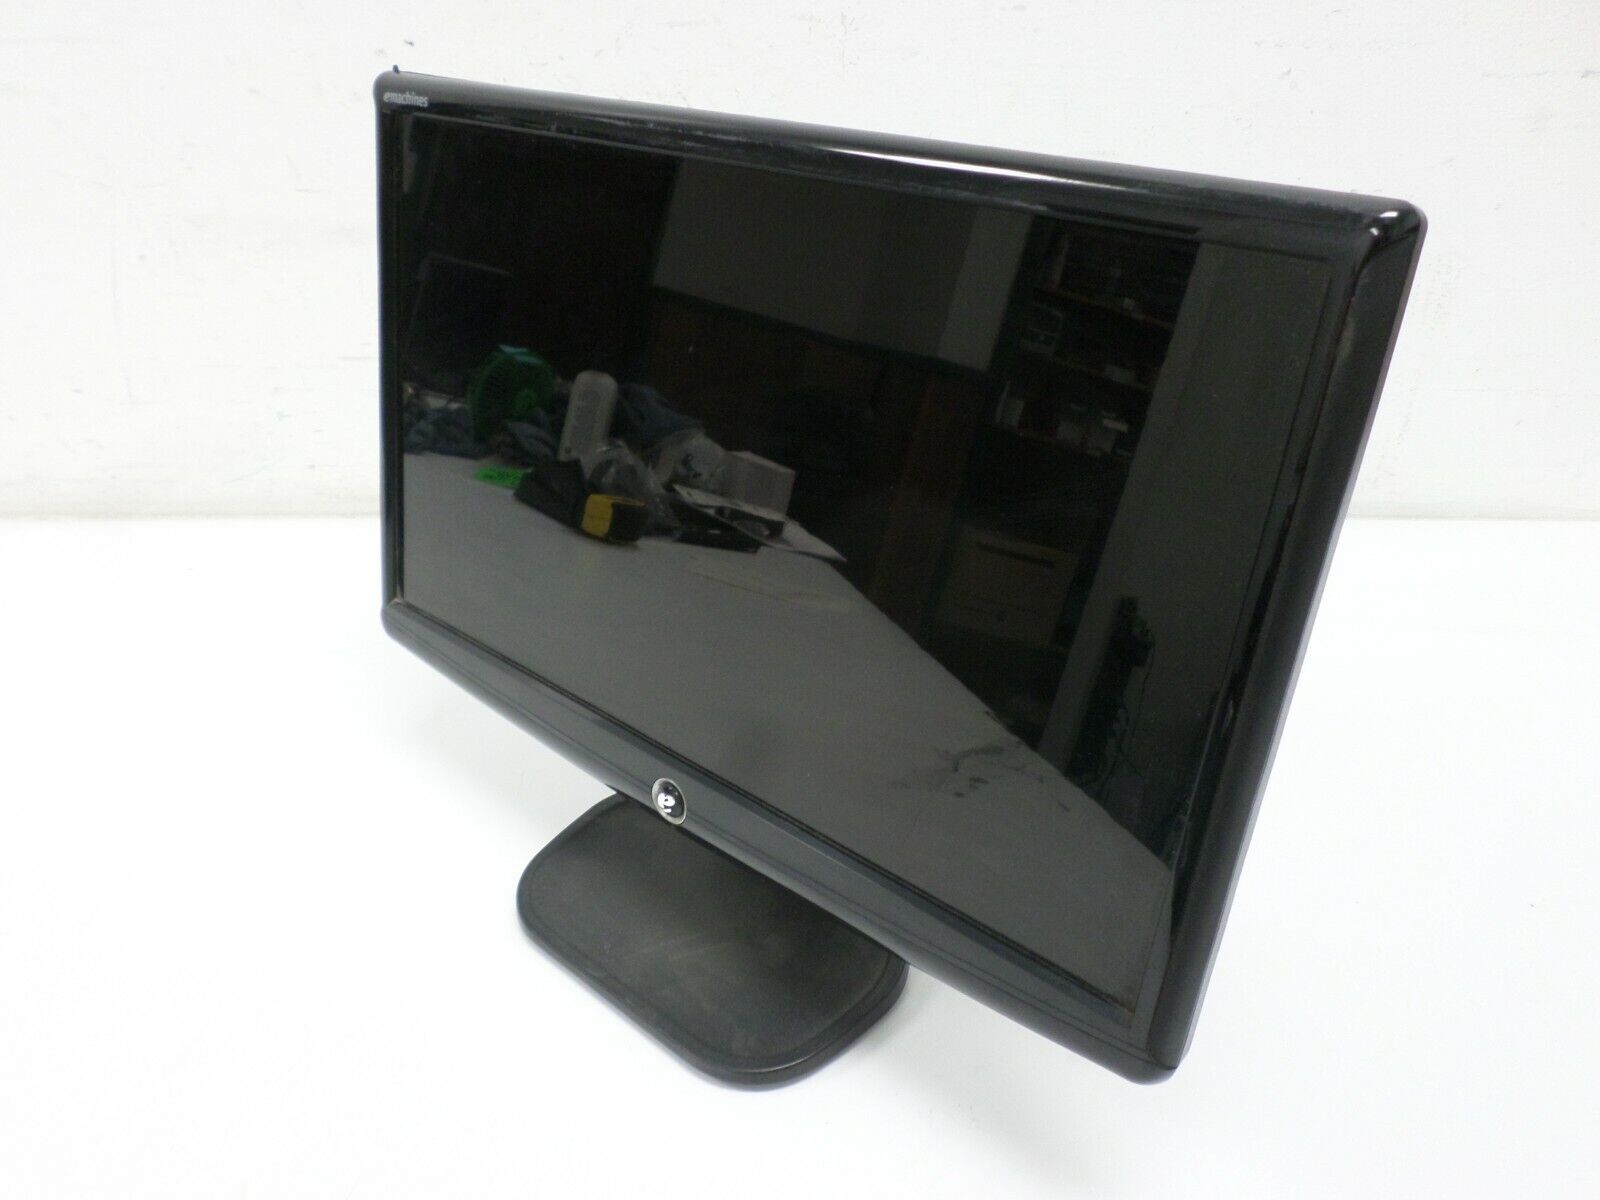 Emachines E182H D 19” LCD Widescreen Monitor 